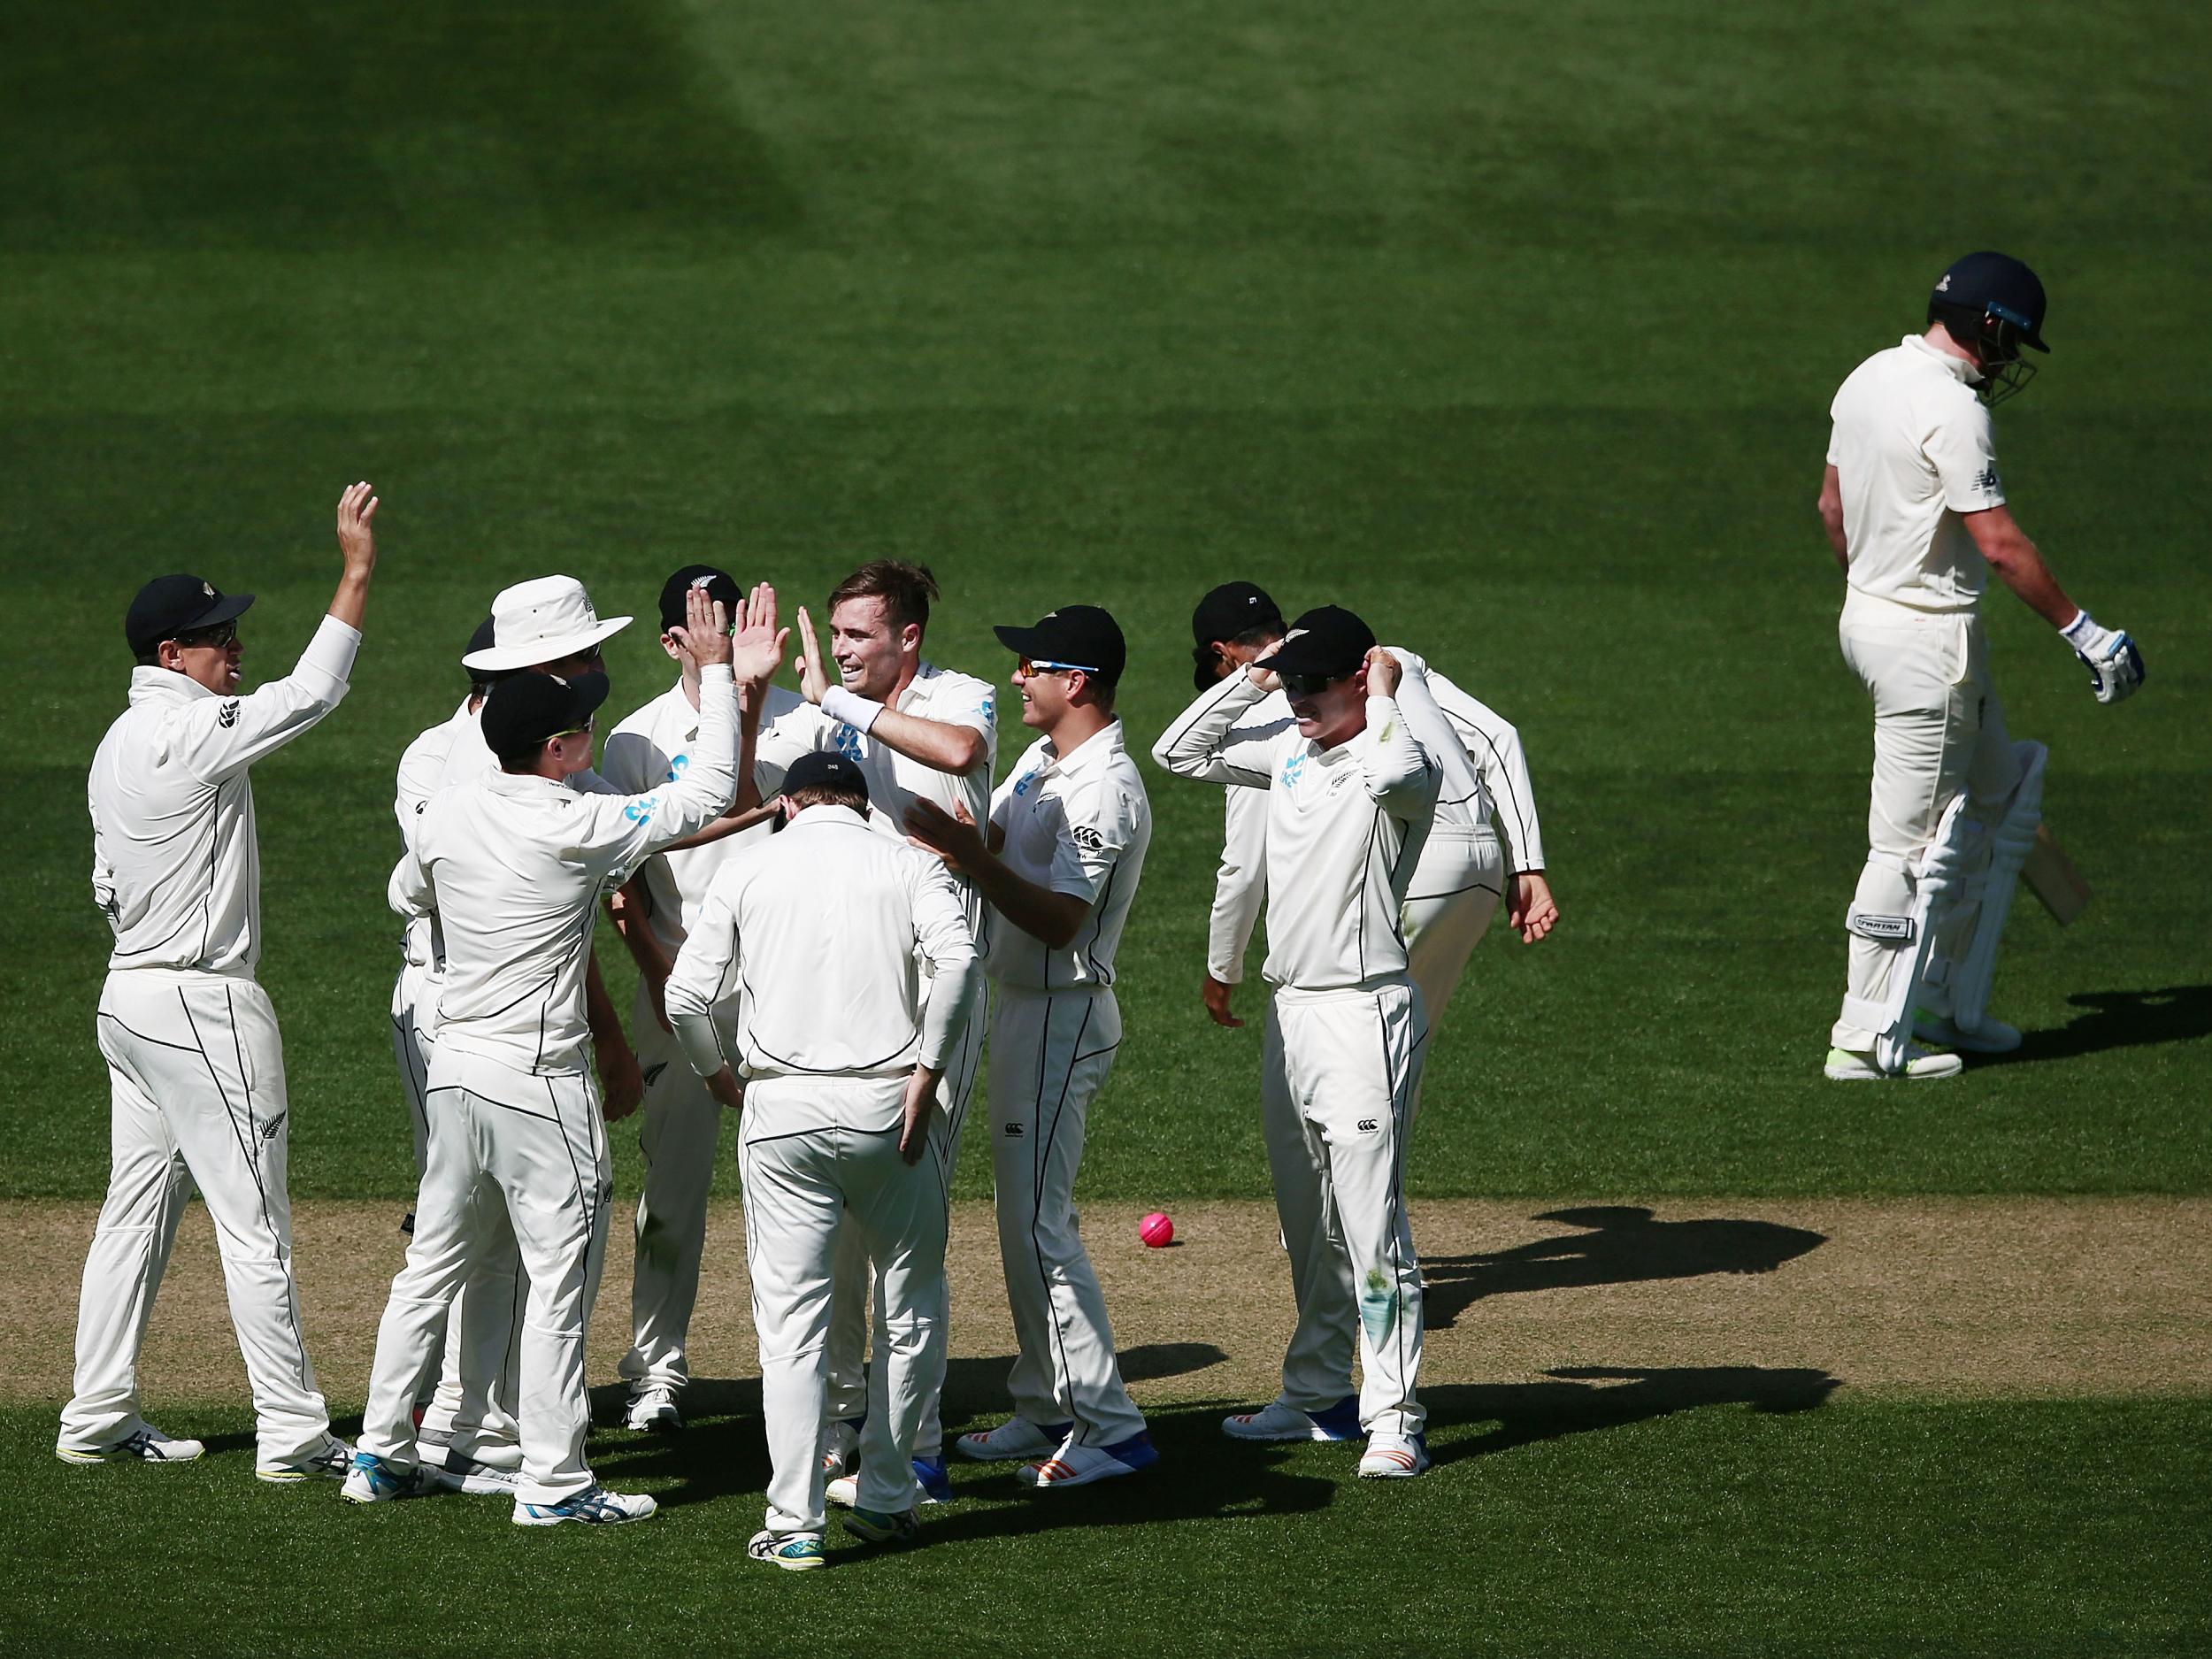 Southee cleaned up the rest including the wickets of Bairstow, Ali and Broad